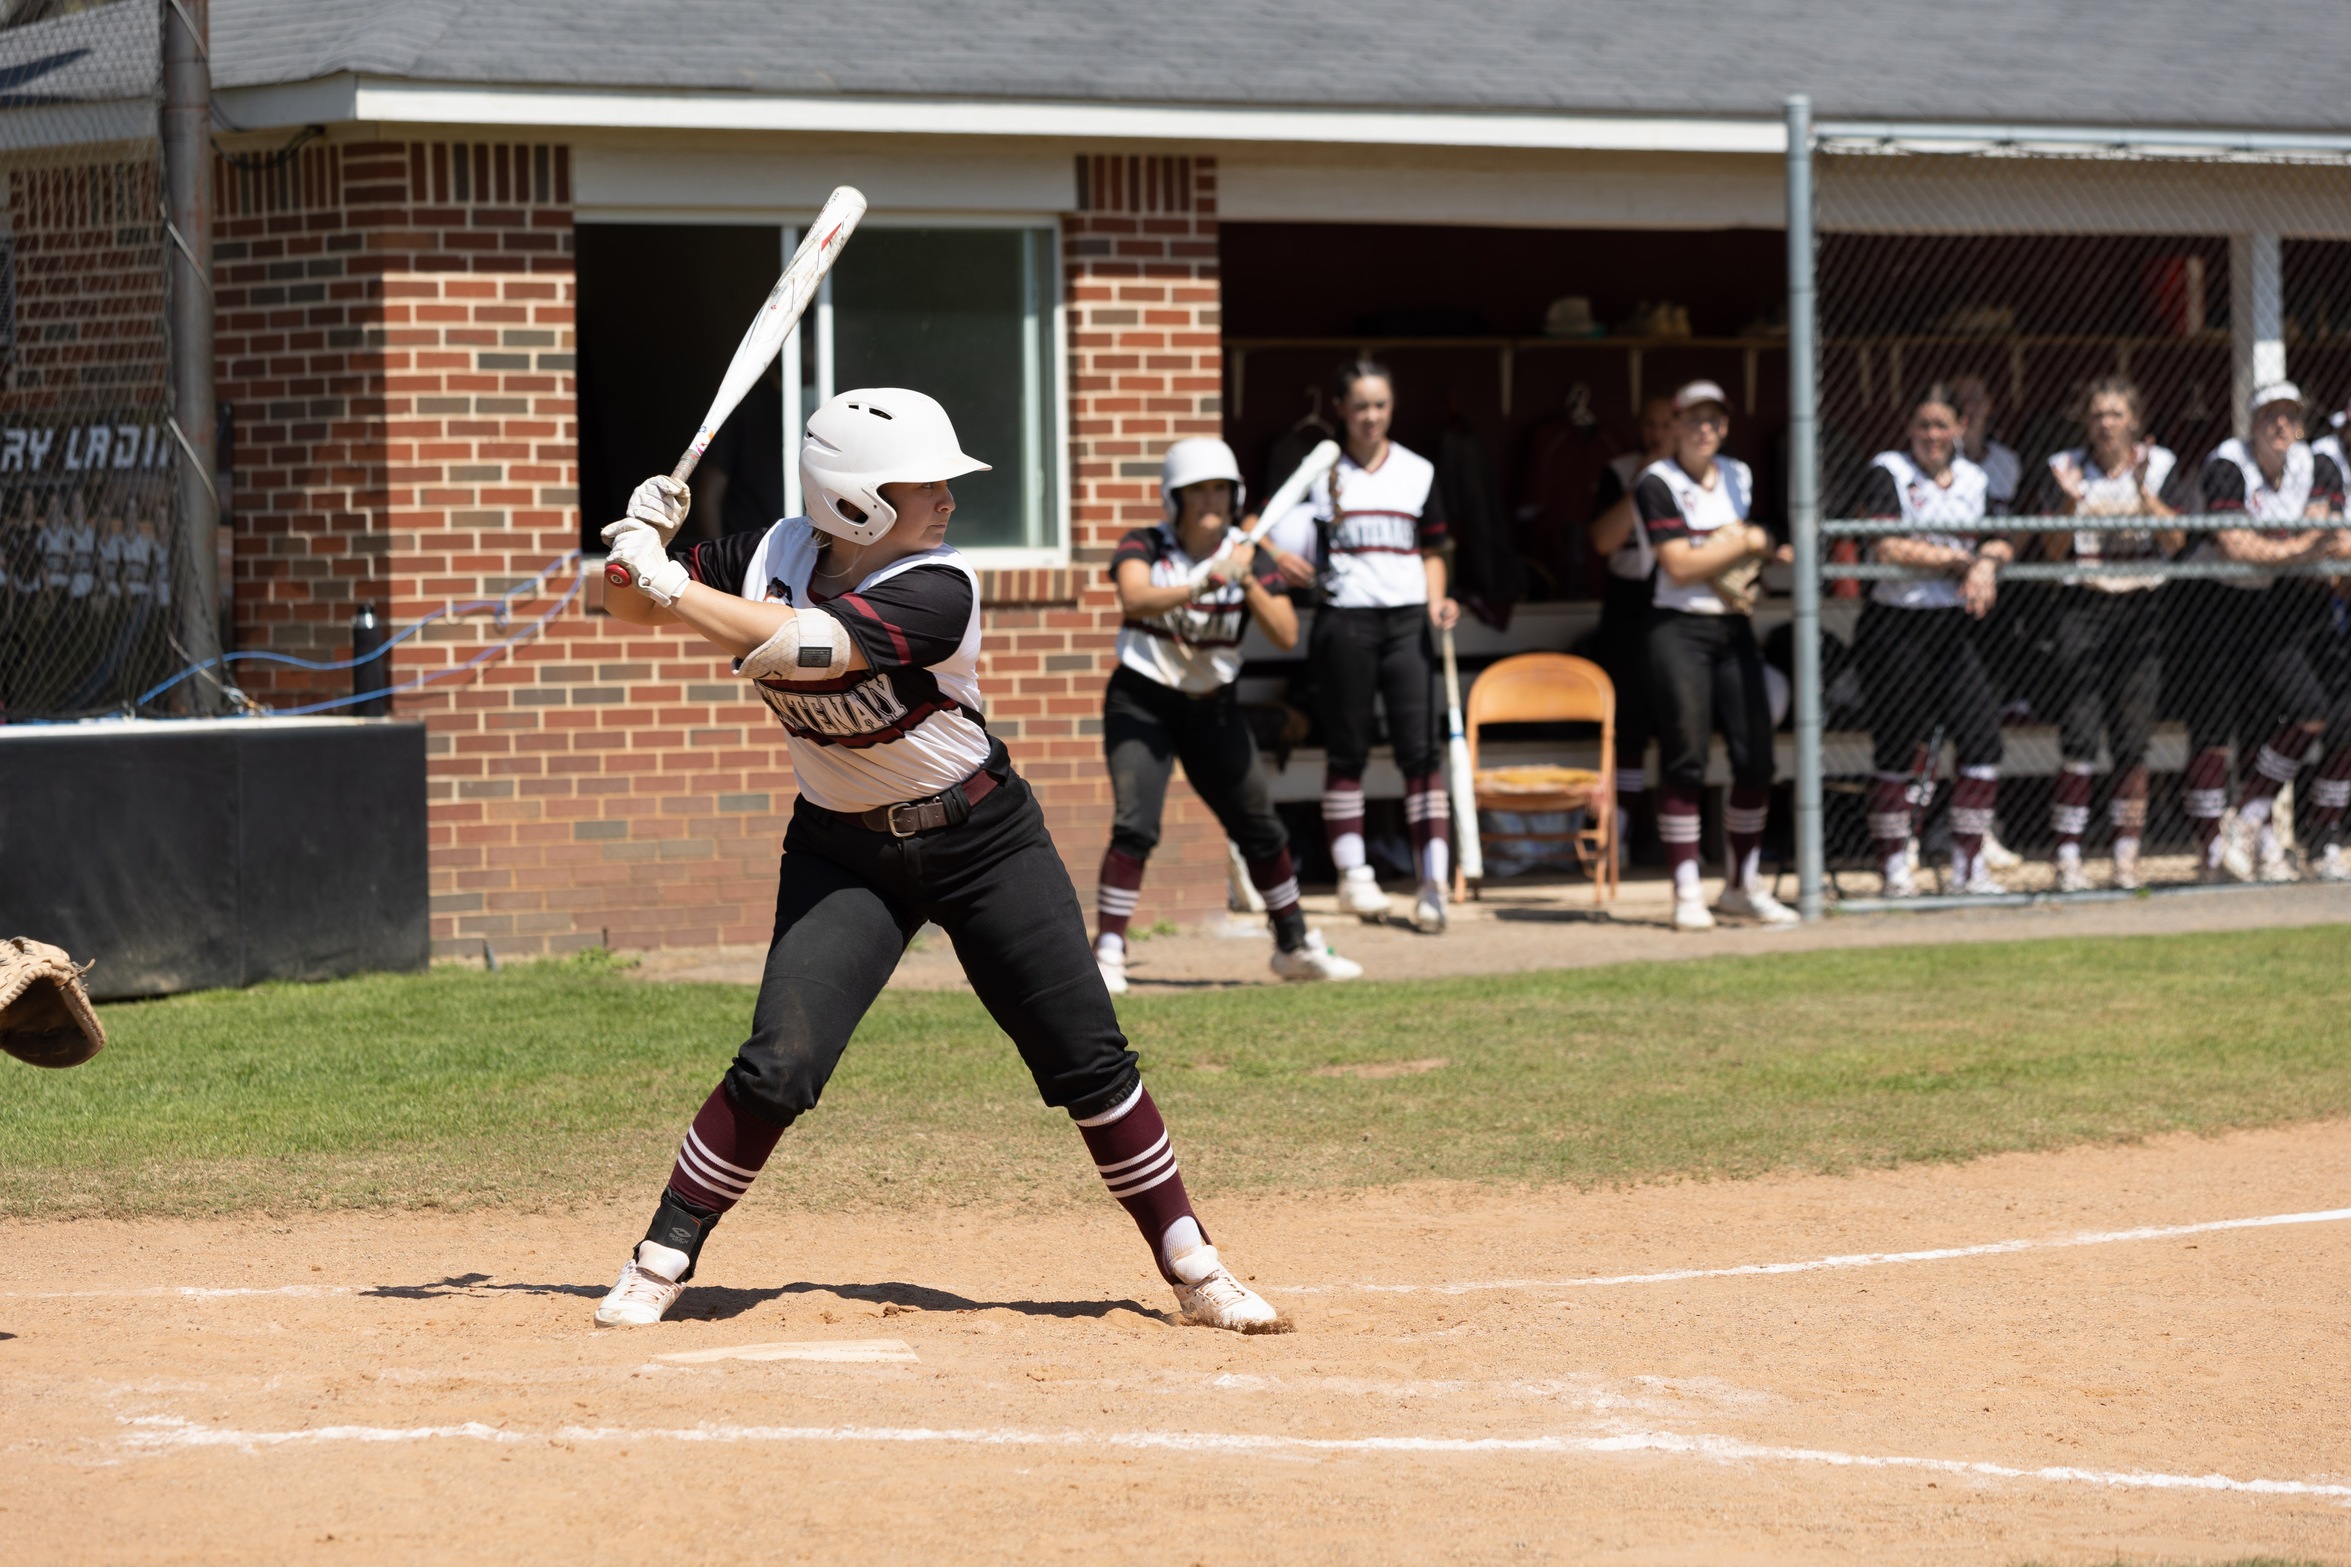 Senior 2B Jaymee Wilkinson had a two-run double for the Ladies in game two of their DH on Friday.